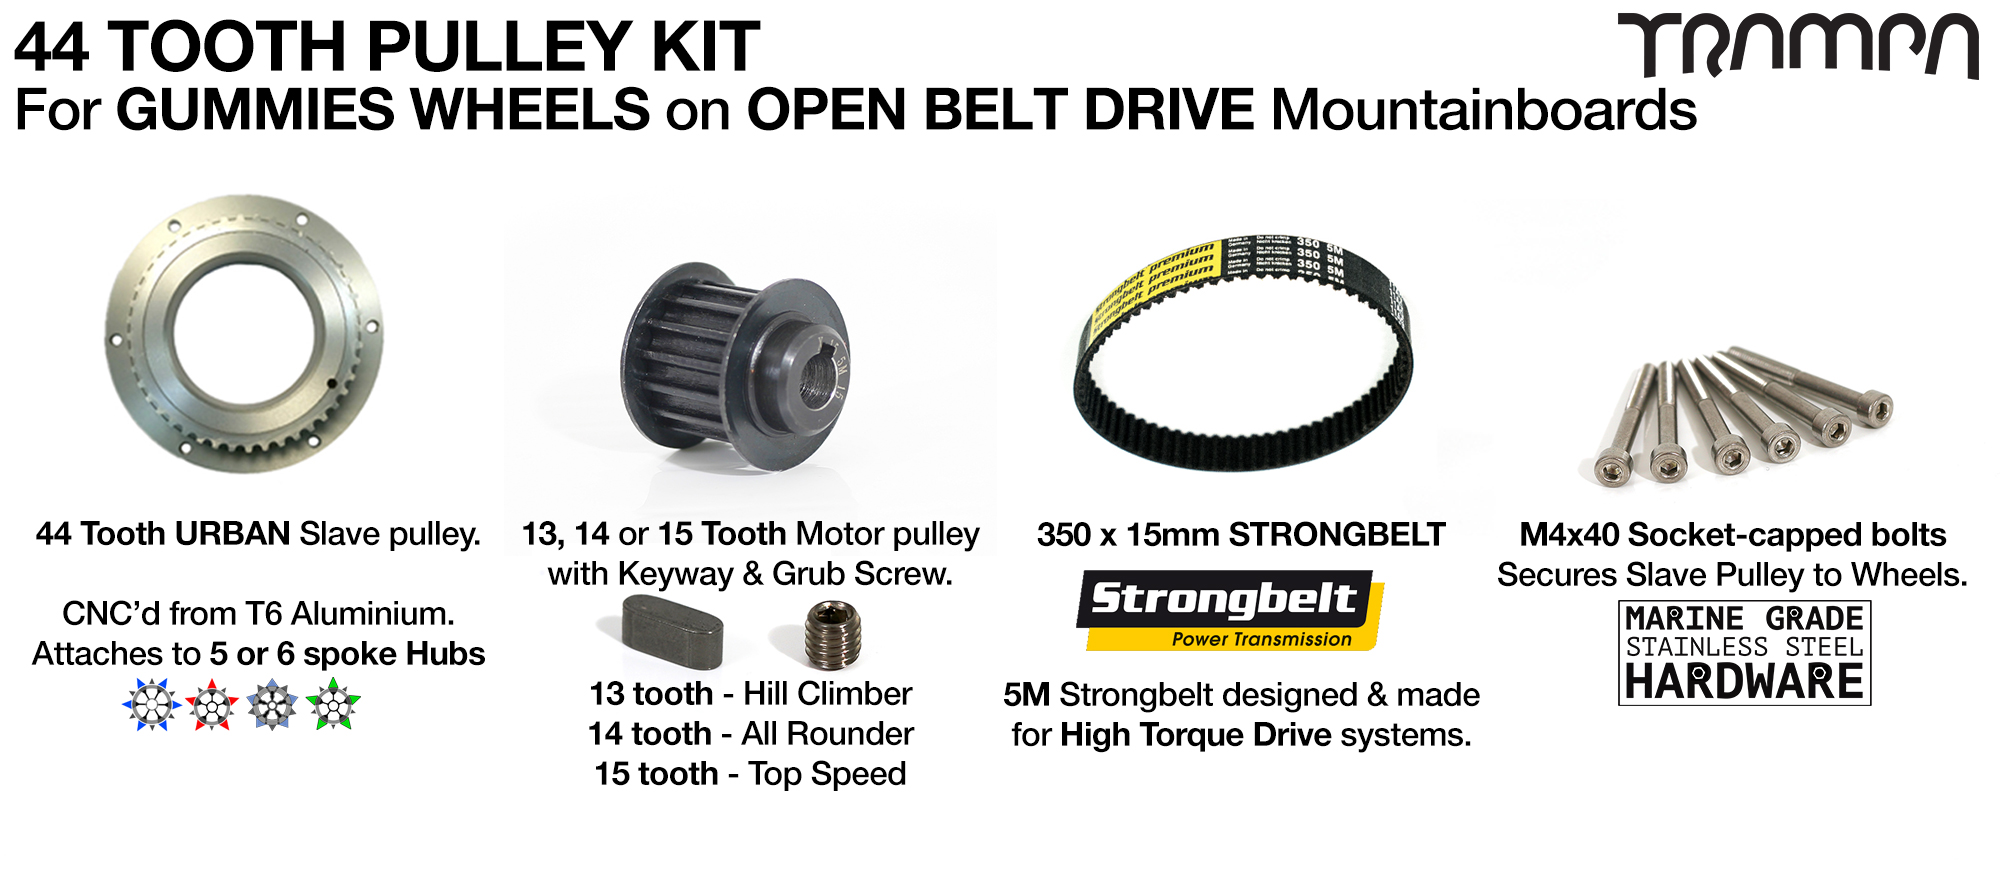 66T OBD Motor Mount panel with 44 Tooth Pulley Kit with 330mm x 15mm Belt for GUMMIES Wheels